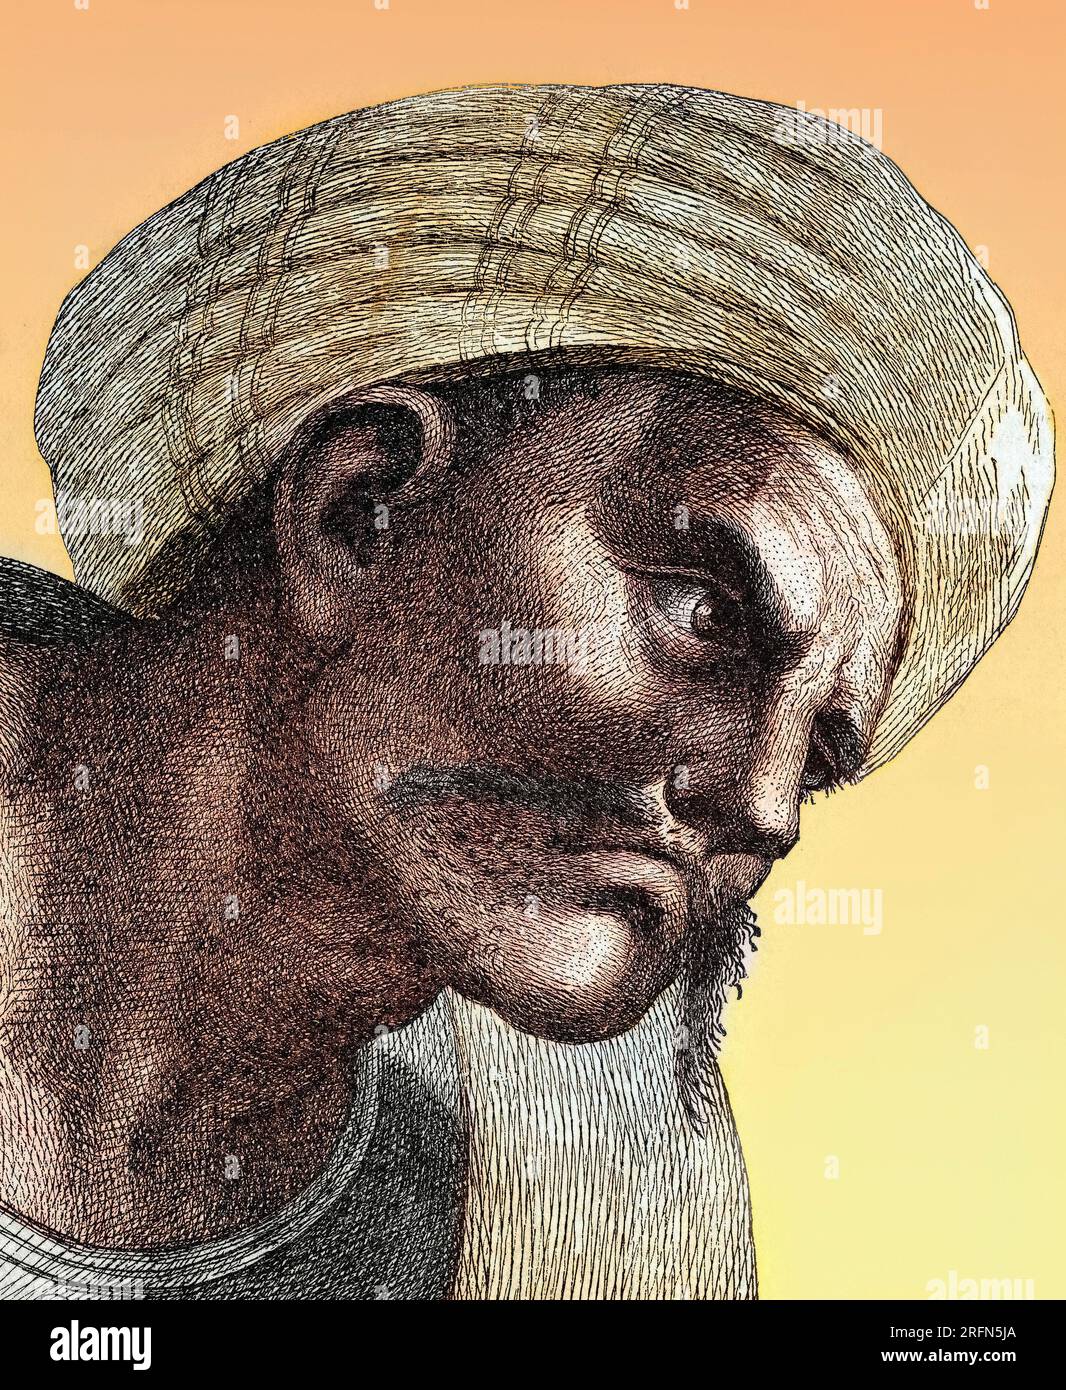 Abu l-Walid Muhammad bin Ahmad bin Rusd or by his Latinized name Averroes (1126-1198) was an Al-Andalus Muslim polymath, a master of Aristotelian philosophy, Islamic philosophy, Islamic theology, Maliki law and jurisprudence, logic, psychology, politics and Andalusian classical music theory, and the sciences of medicine, astronomy, geography, mathematics, physics and celestial mechanics. Stock Photo